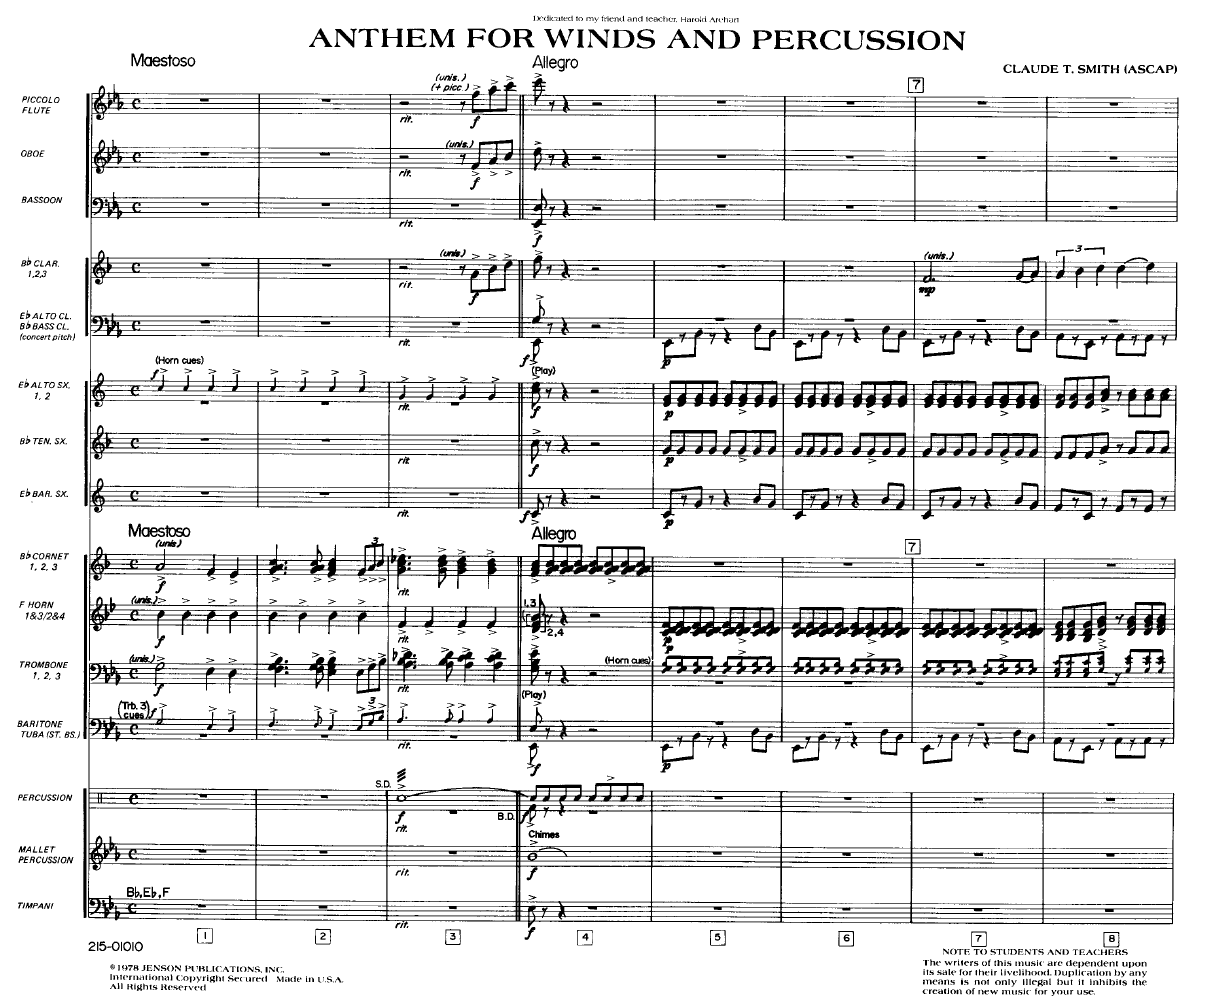 ANTHEM FOR WINDS AND PERCUSSION